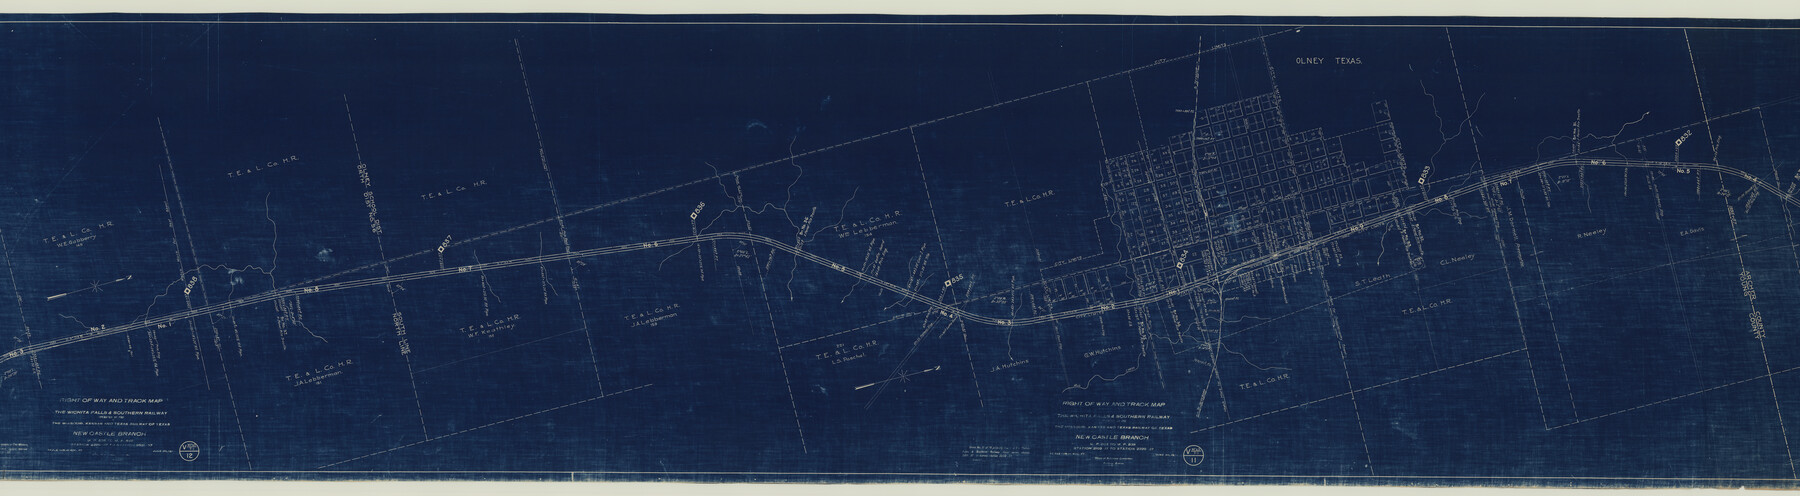 64513, Right of Way and Track Map, The Wichita Falls & Southern Railway, General Map Collection